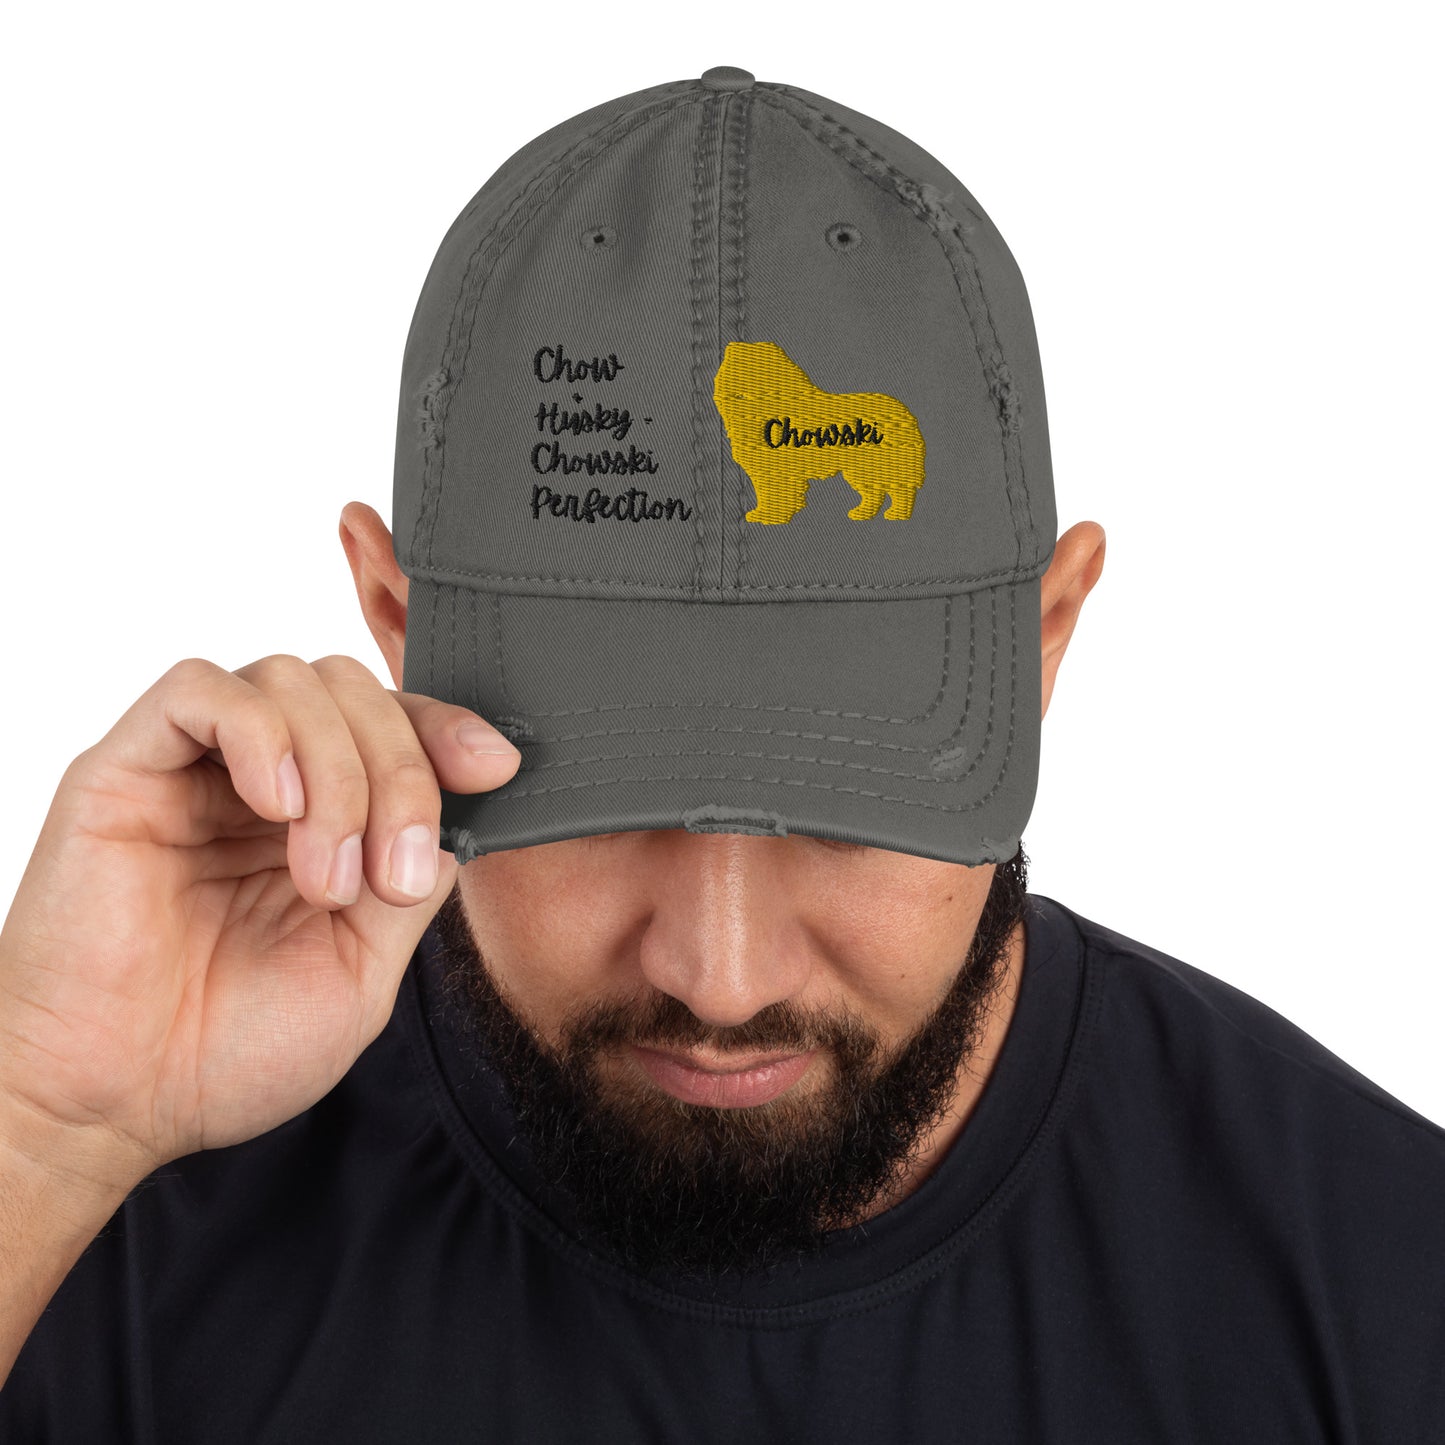 Chow + Husky = Chowski Embroidered Unisex Dad Hat